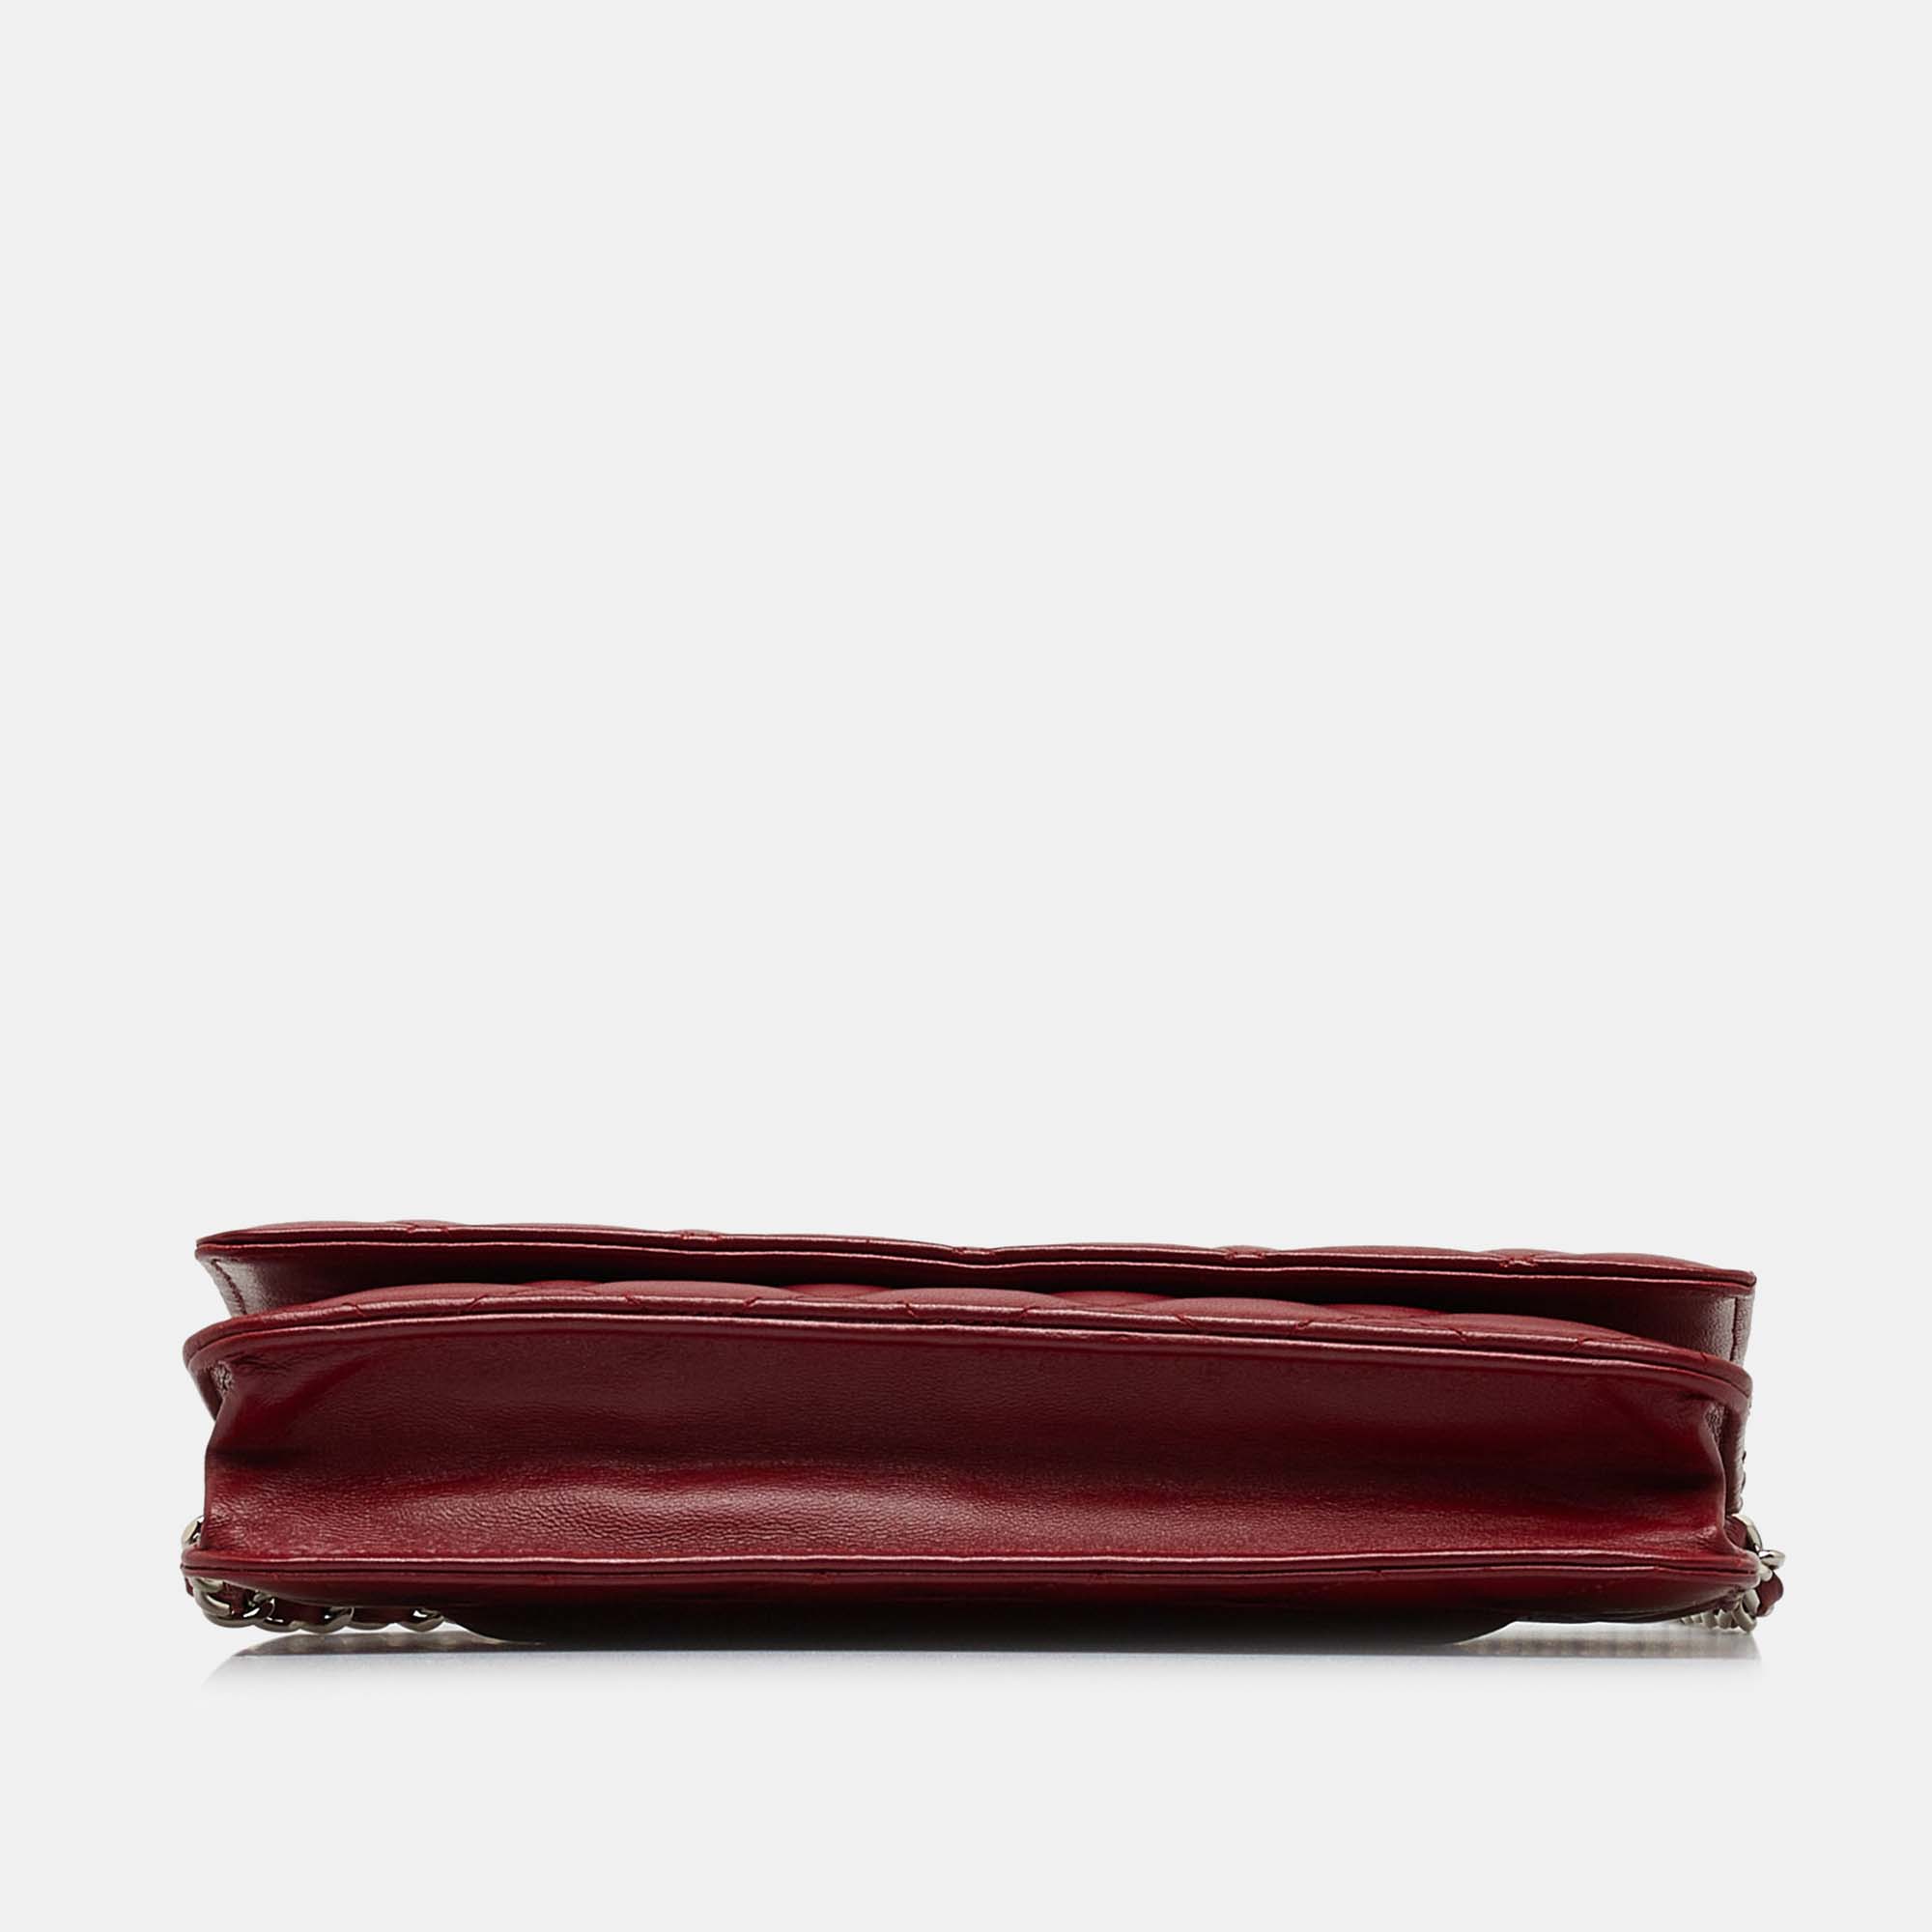 Chanel Red Leather Classic Wallet On Chain